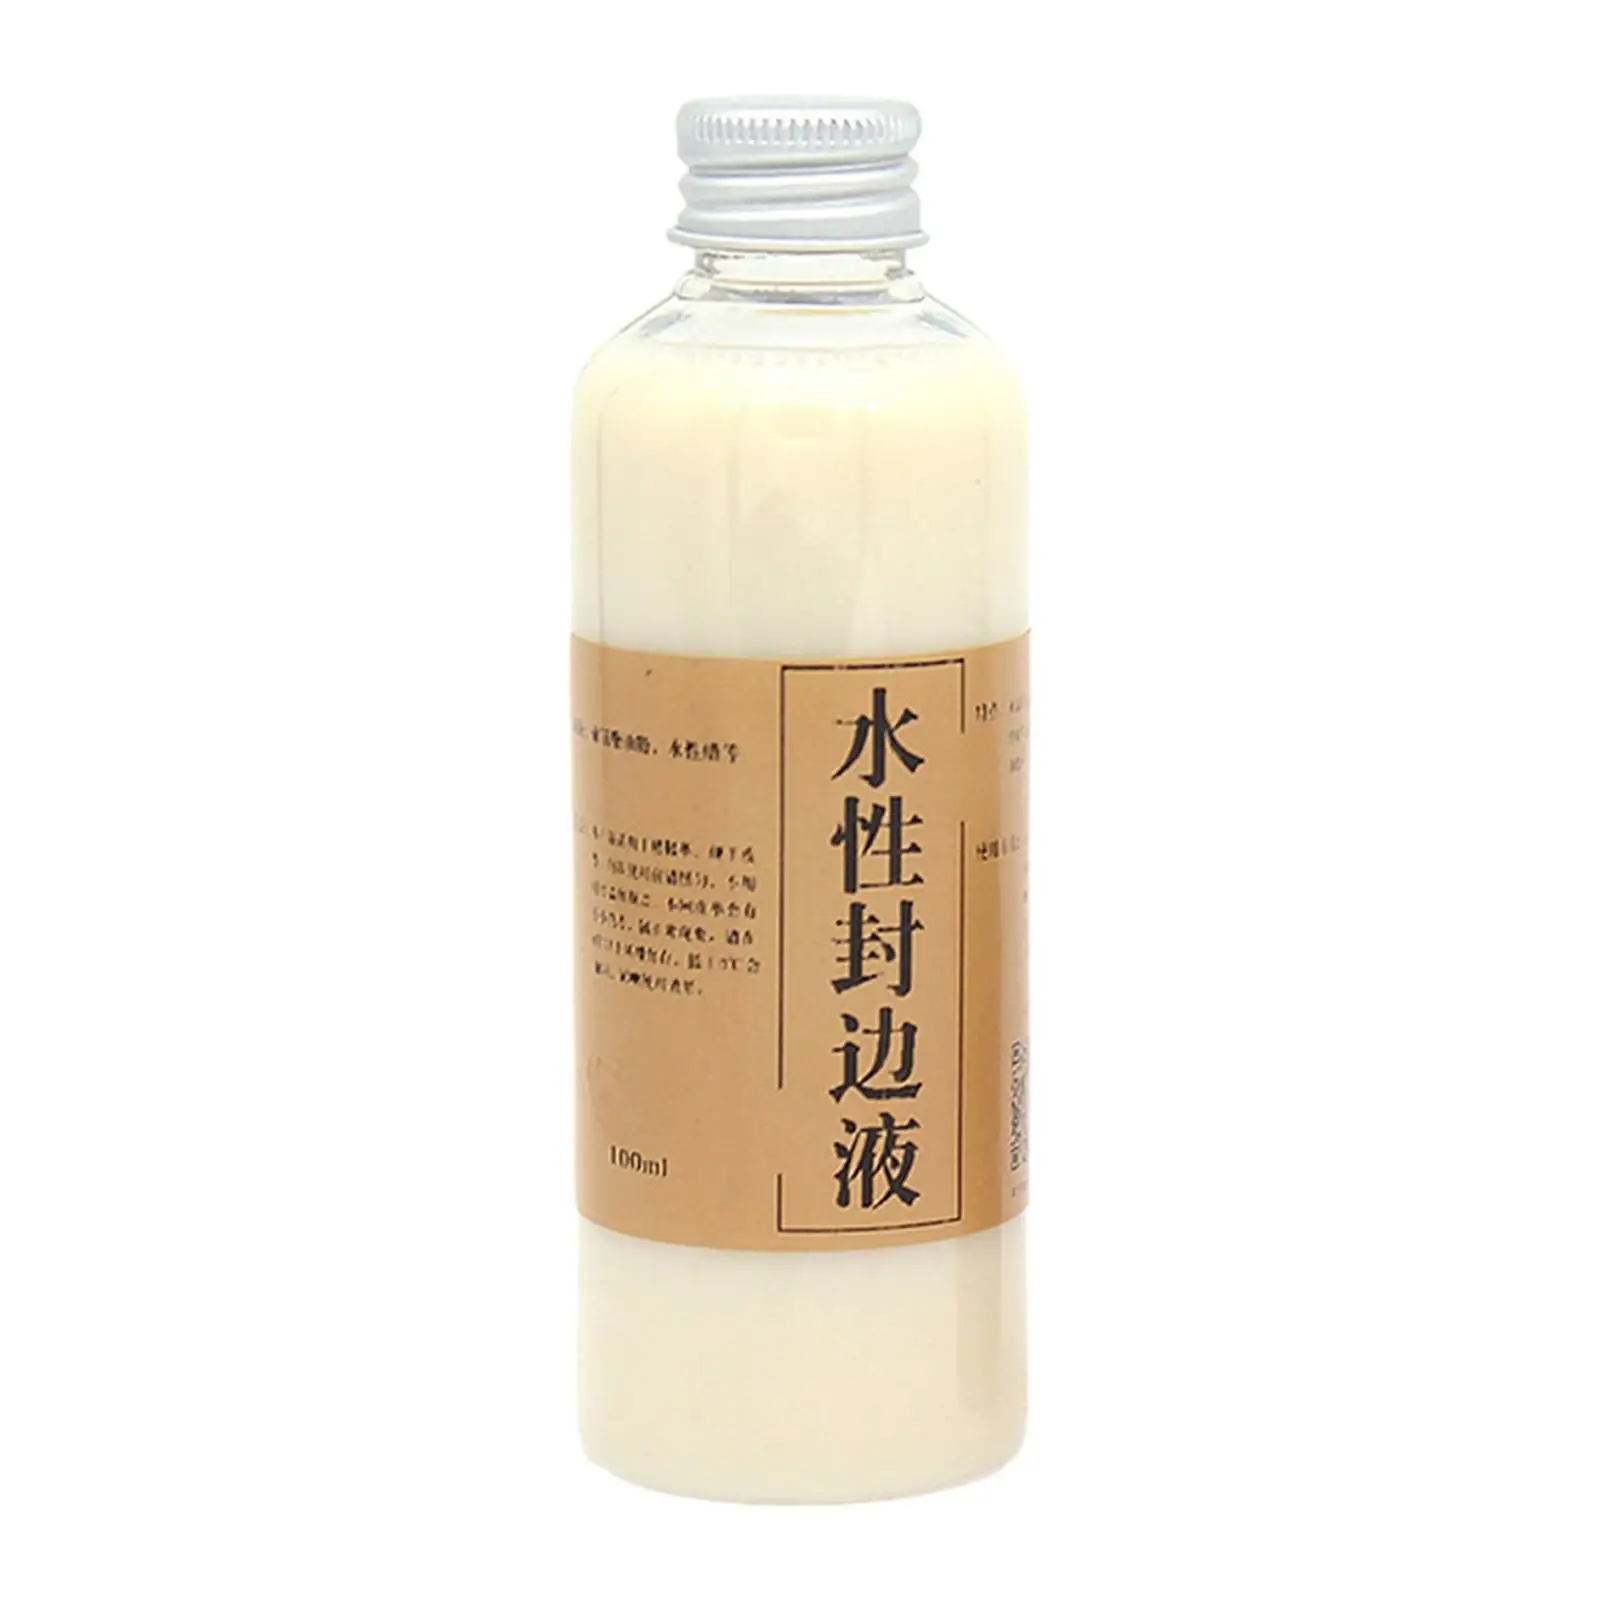 Leather Paint Cream 100ml Coloring Leather Edges Leather Repairing Tool Supplies Wallet Leather Leather Crafst Oil Paint